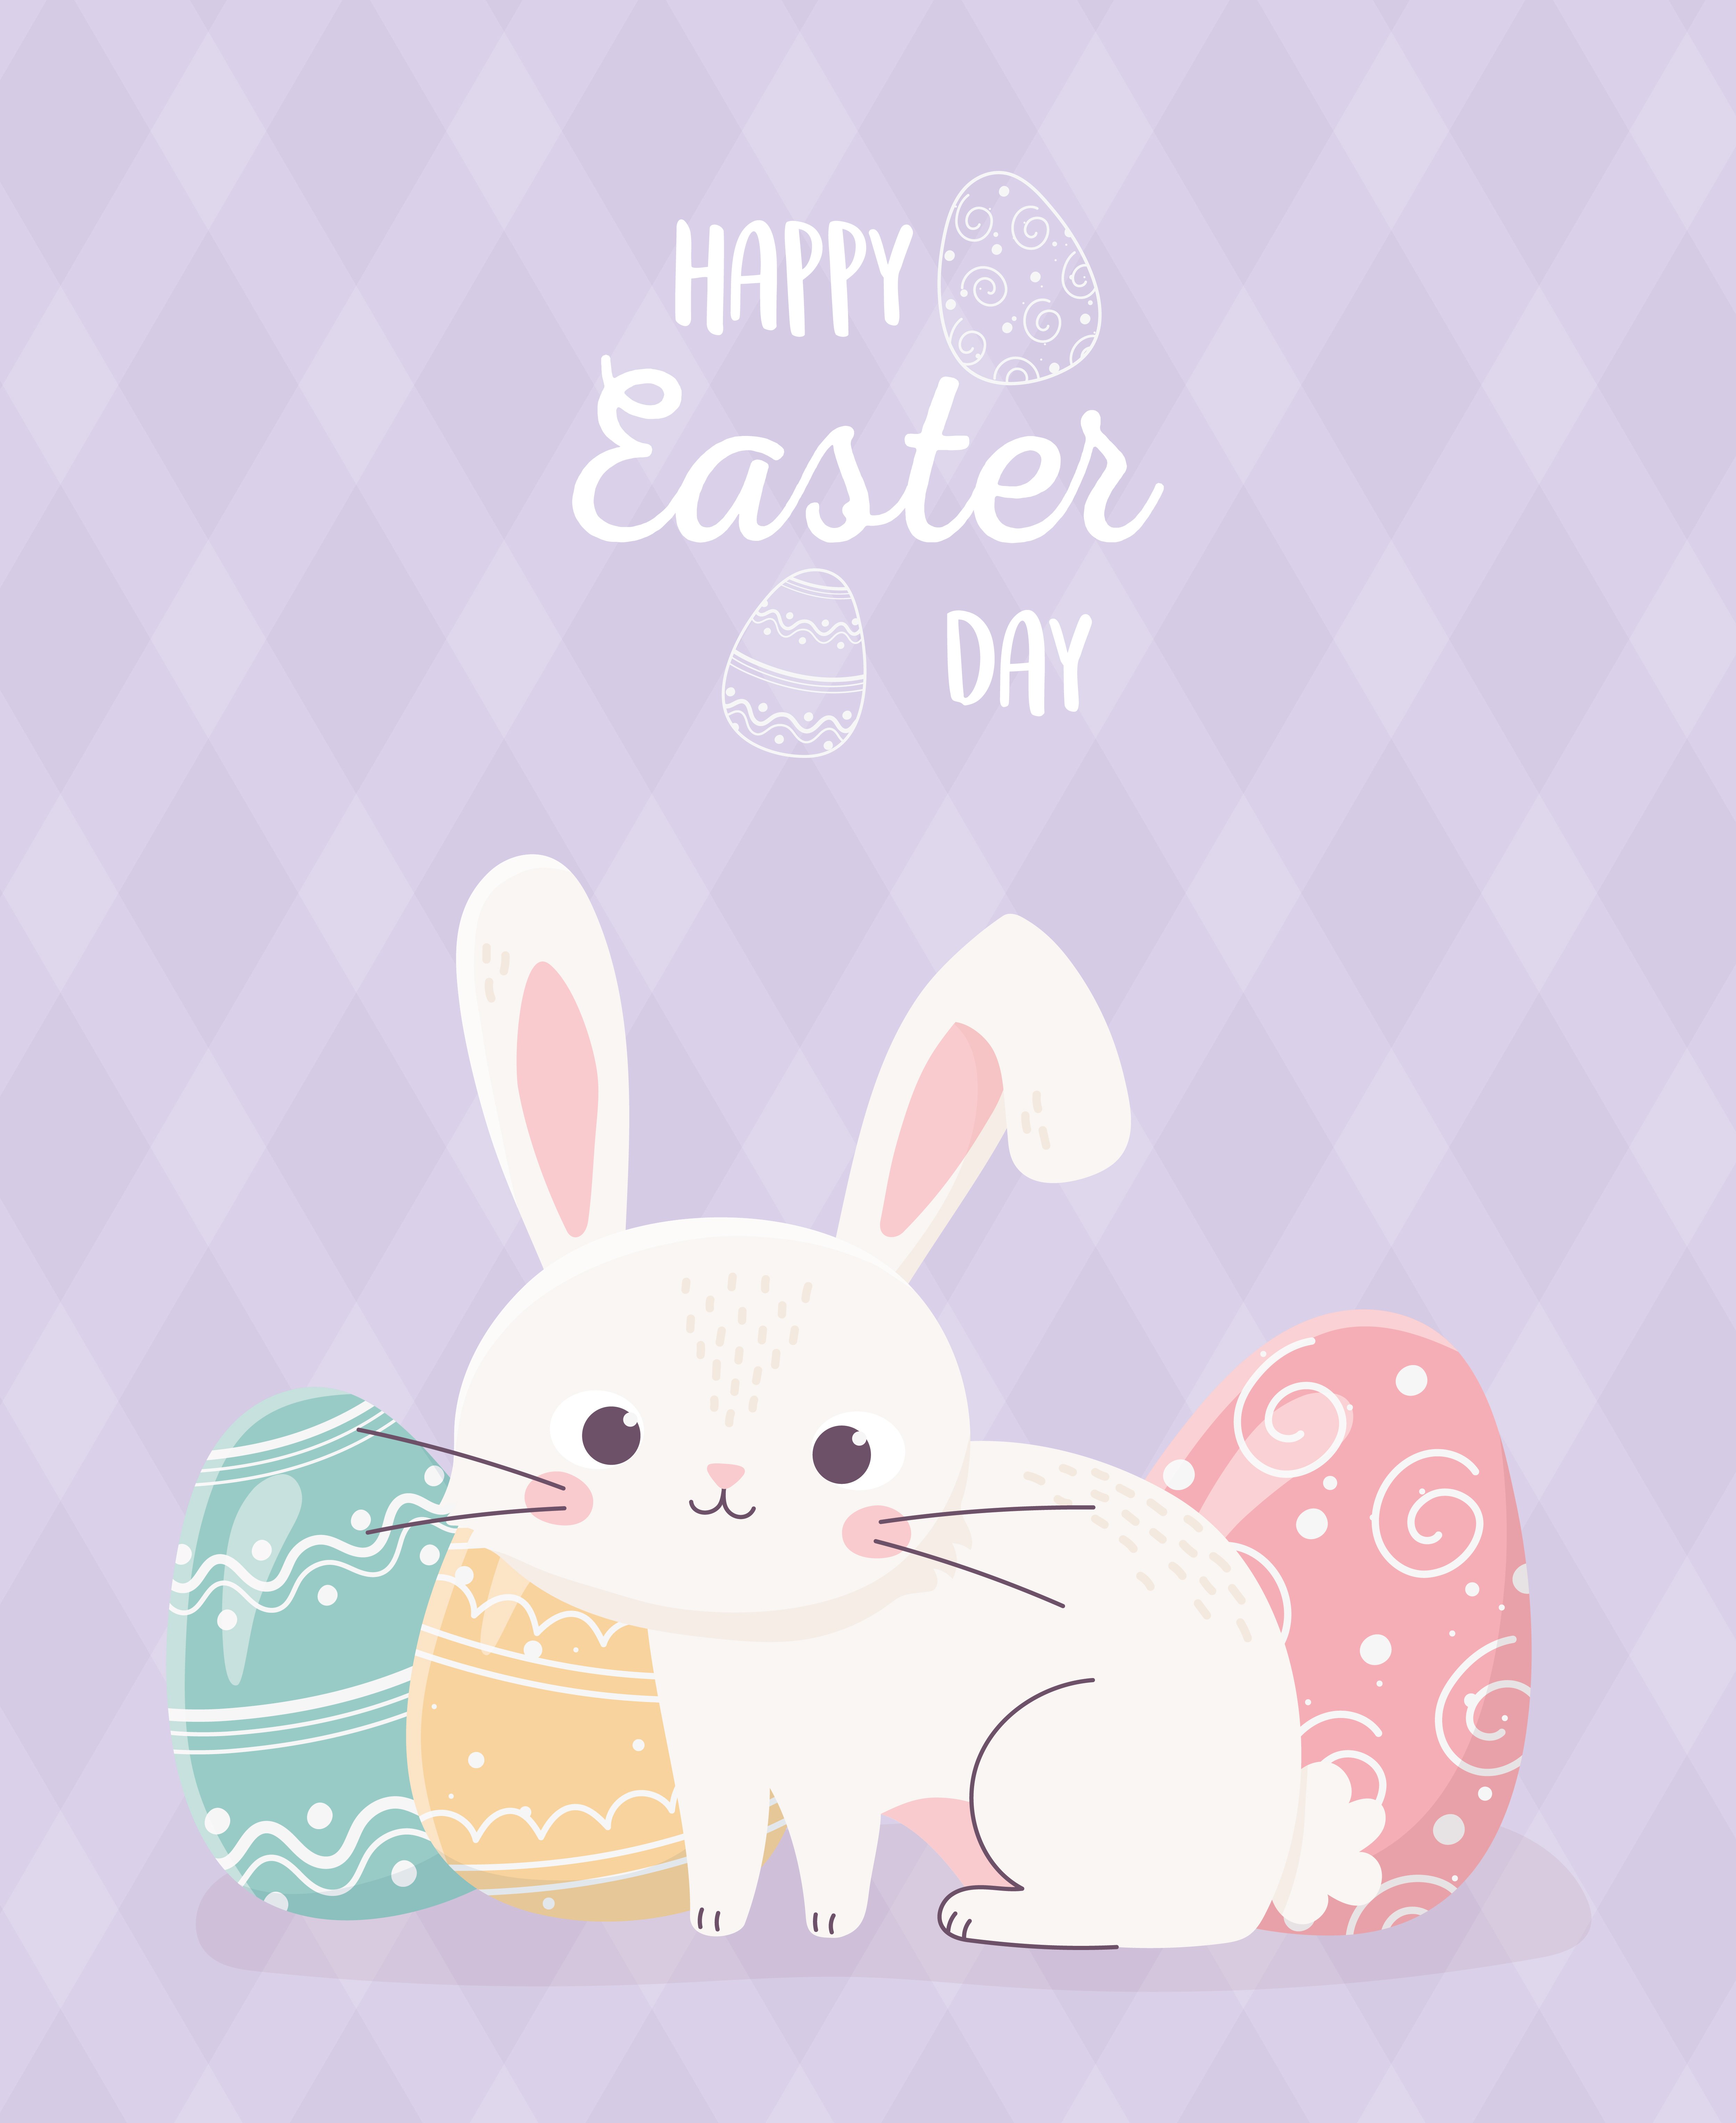 Happy Easter Day celebration with bunny and eggs